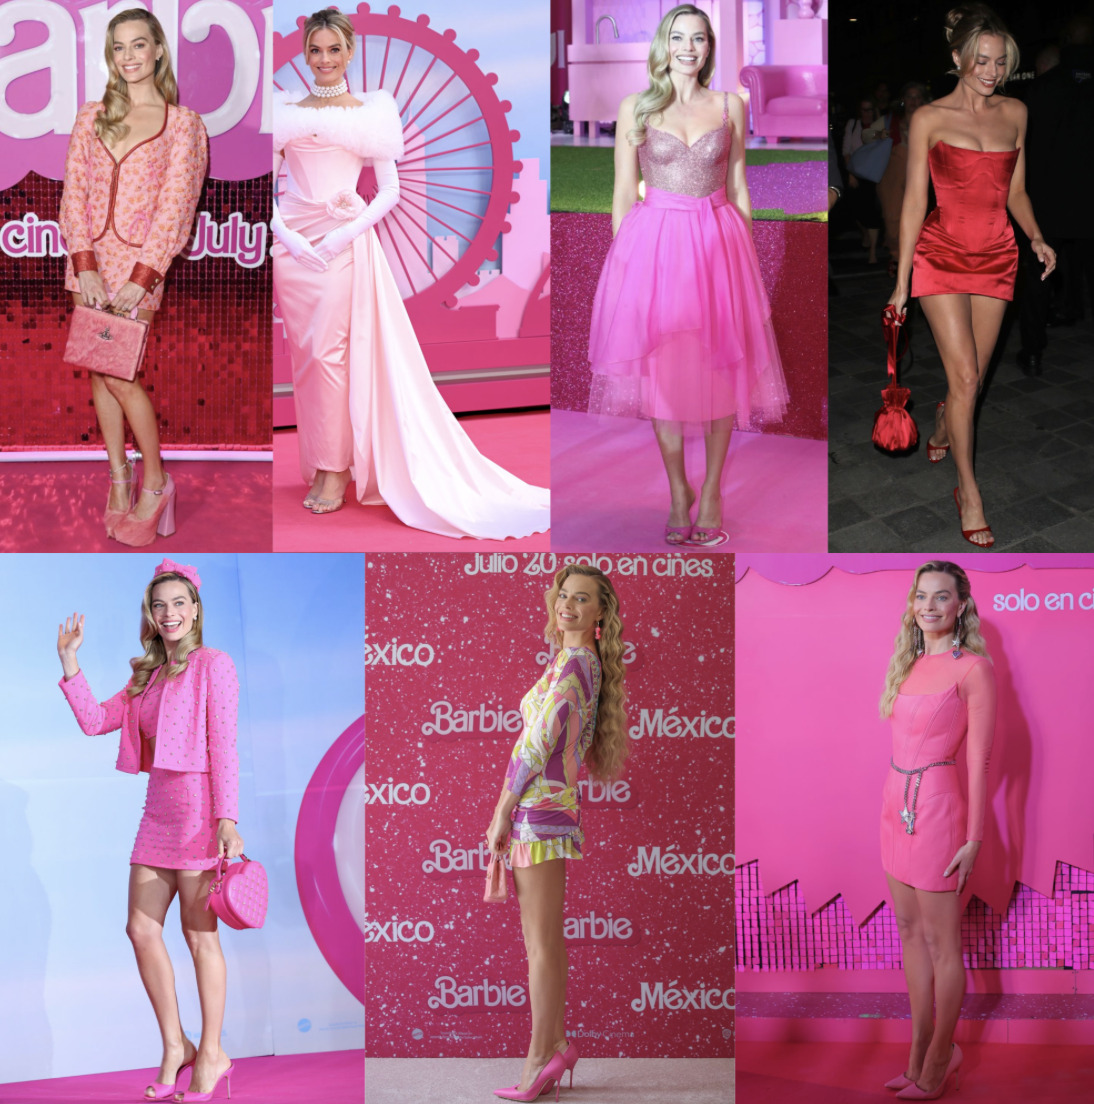 Collection of Margot Robbie's red carpet outfits.